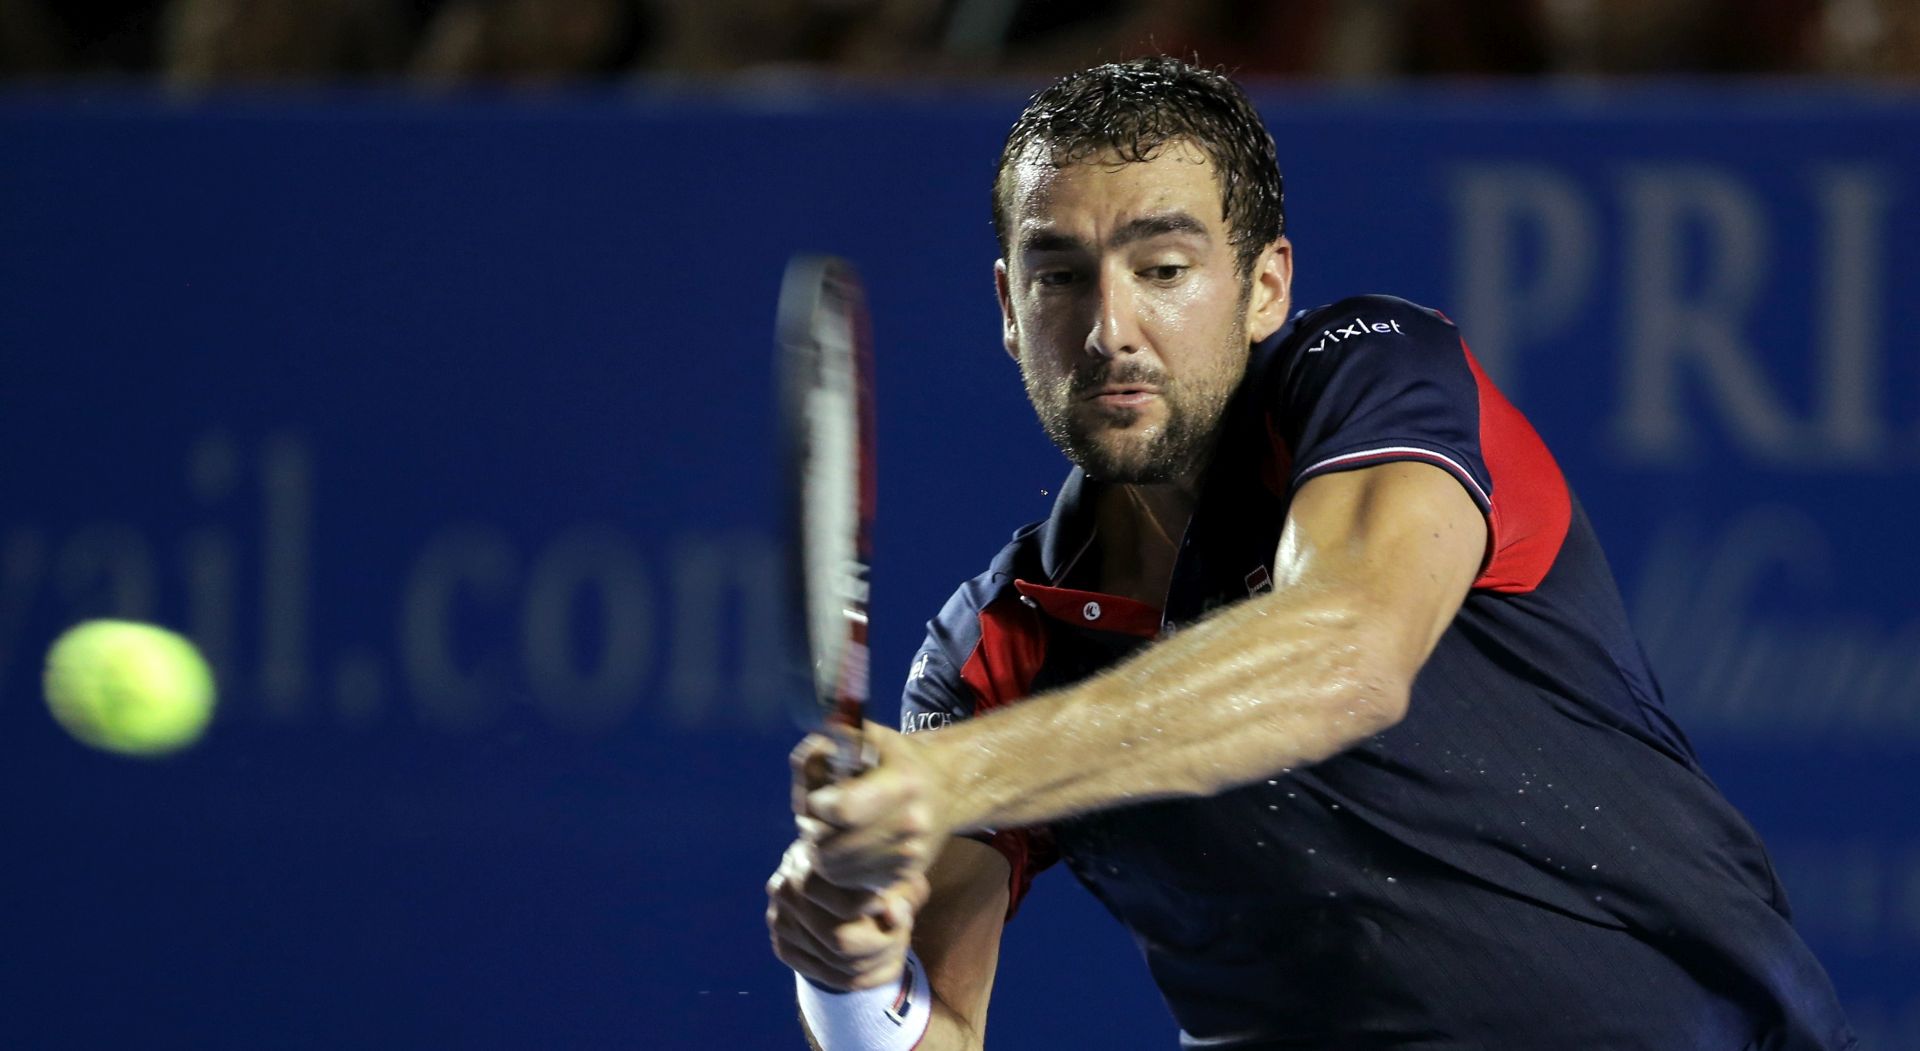 epa05823862 Marin Cilic of Croatia in action against Borna Coric of Croatia during their men's singles match at the Mexican Open Tennis tournament in Acapulco, Mexico, 01 March 2017.  EPA/JOSE MENDEZ